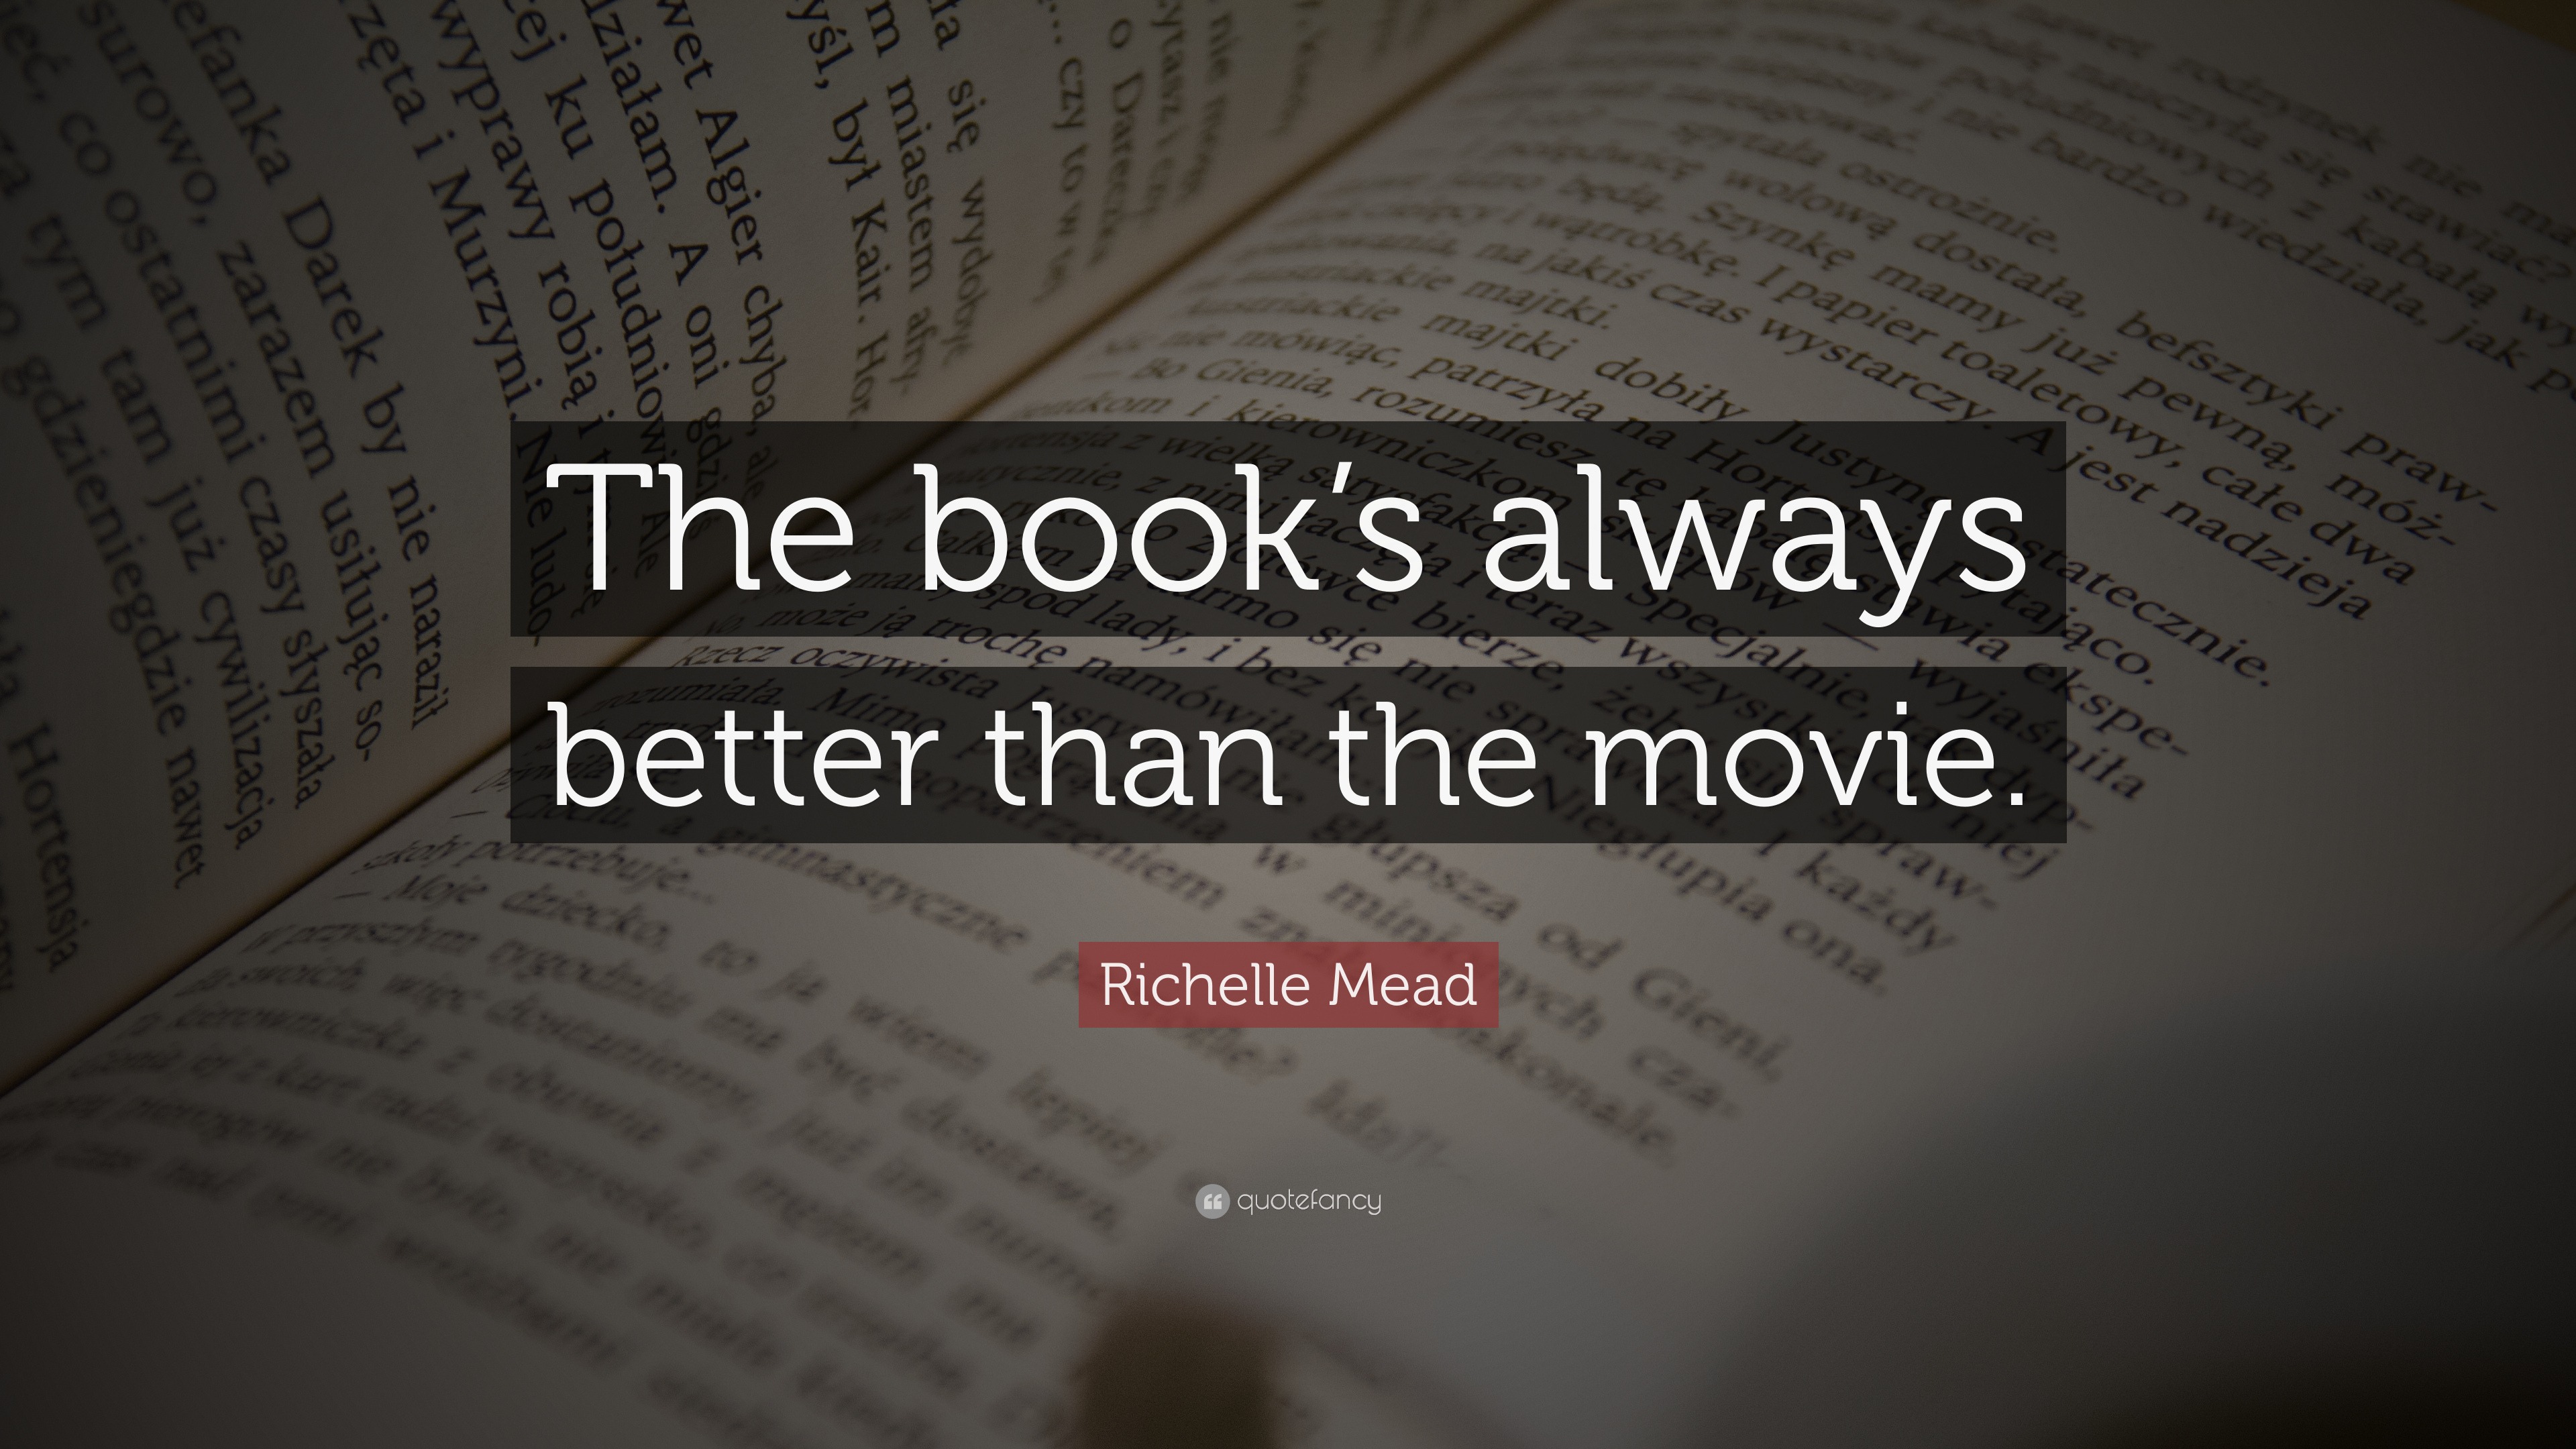 Richelle Mead Quote: “The book's always better than the movie.”